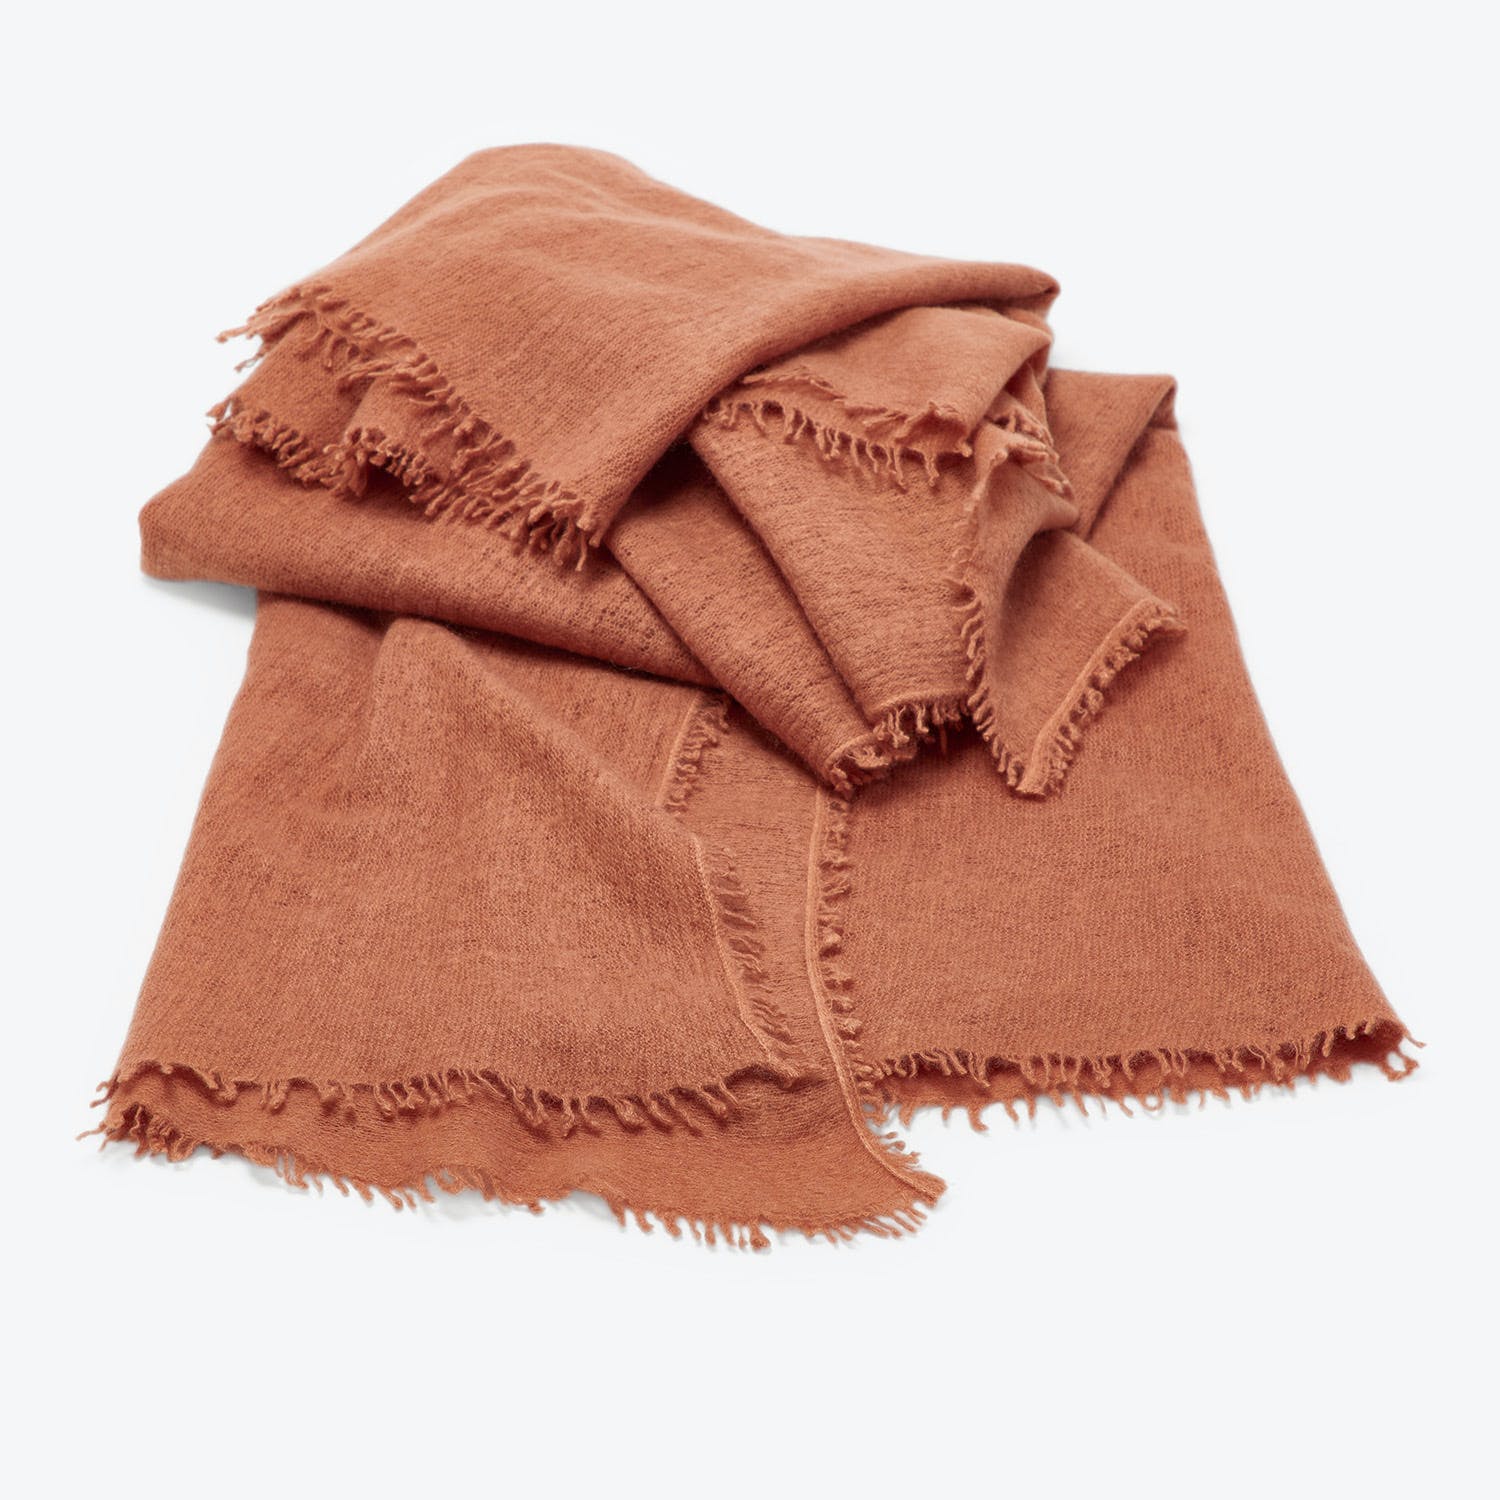 Terracotta-colored textile with woven texture and fringed edges displayed neatly.